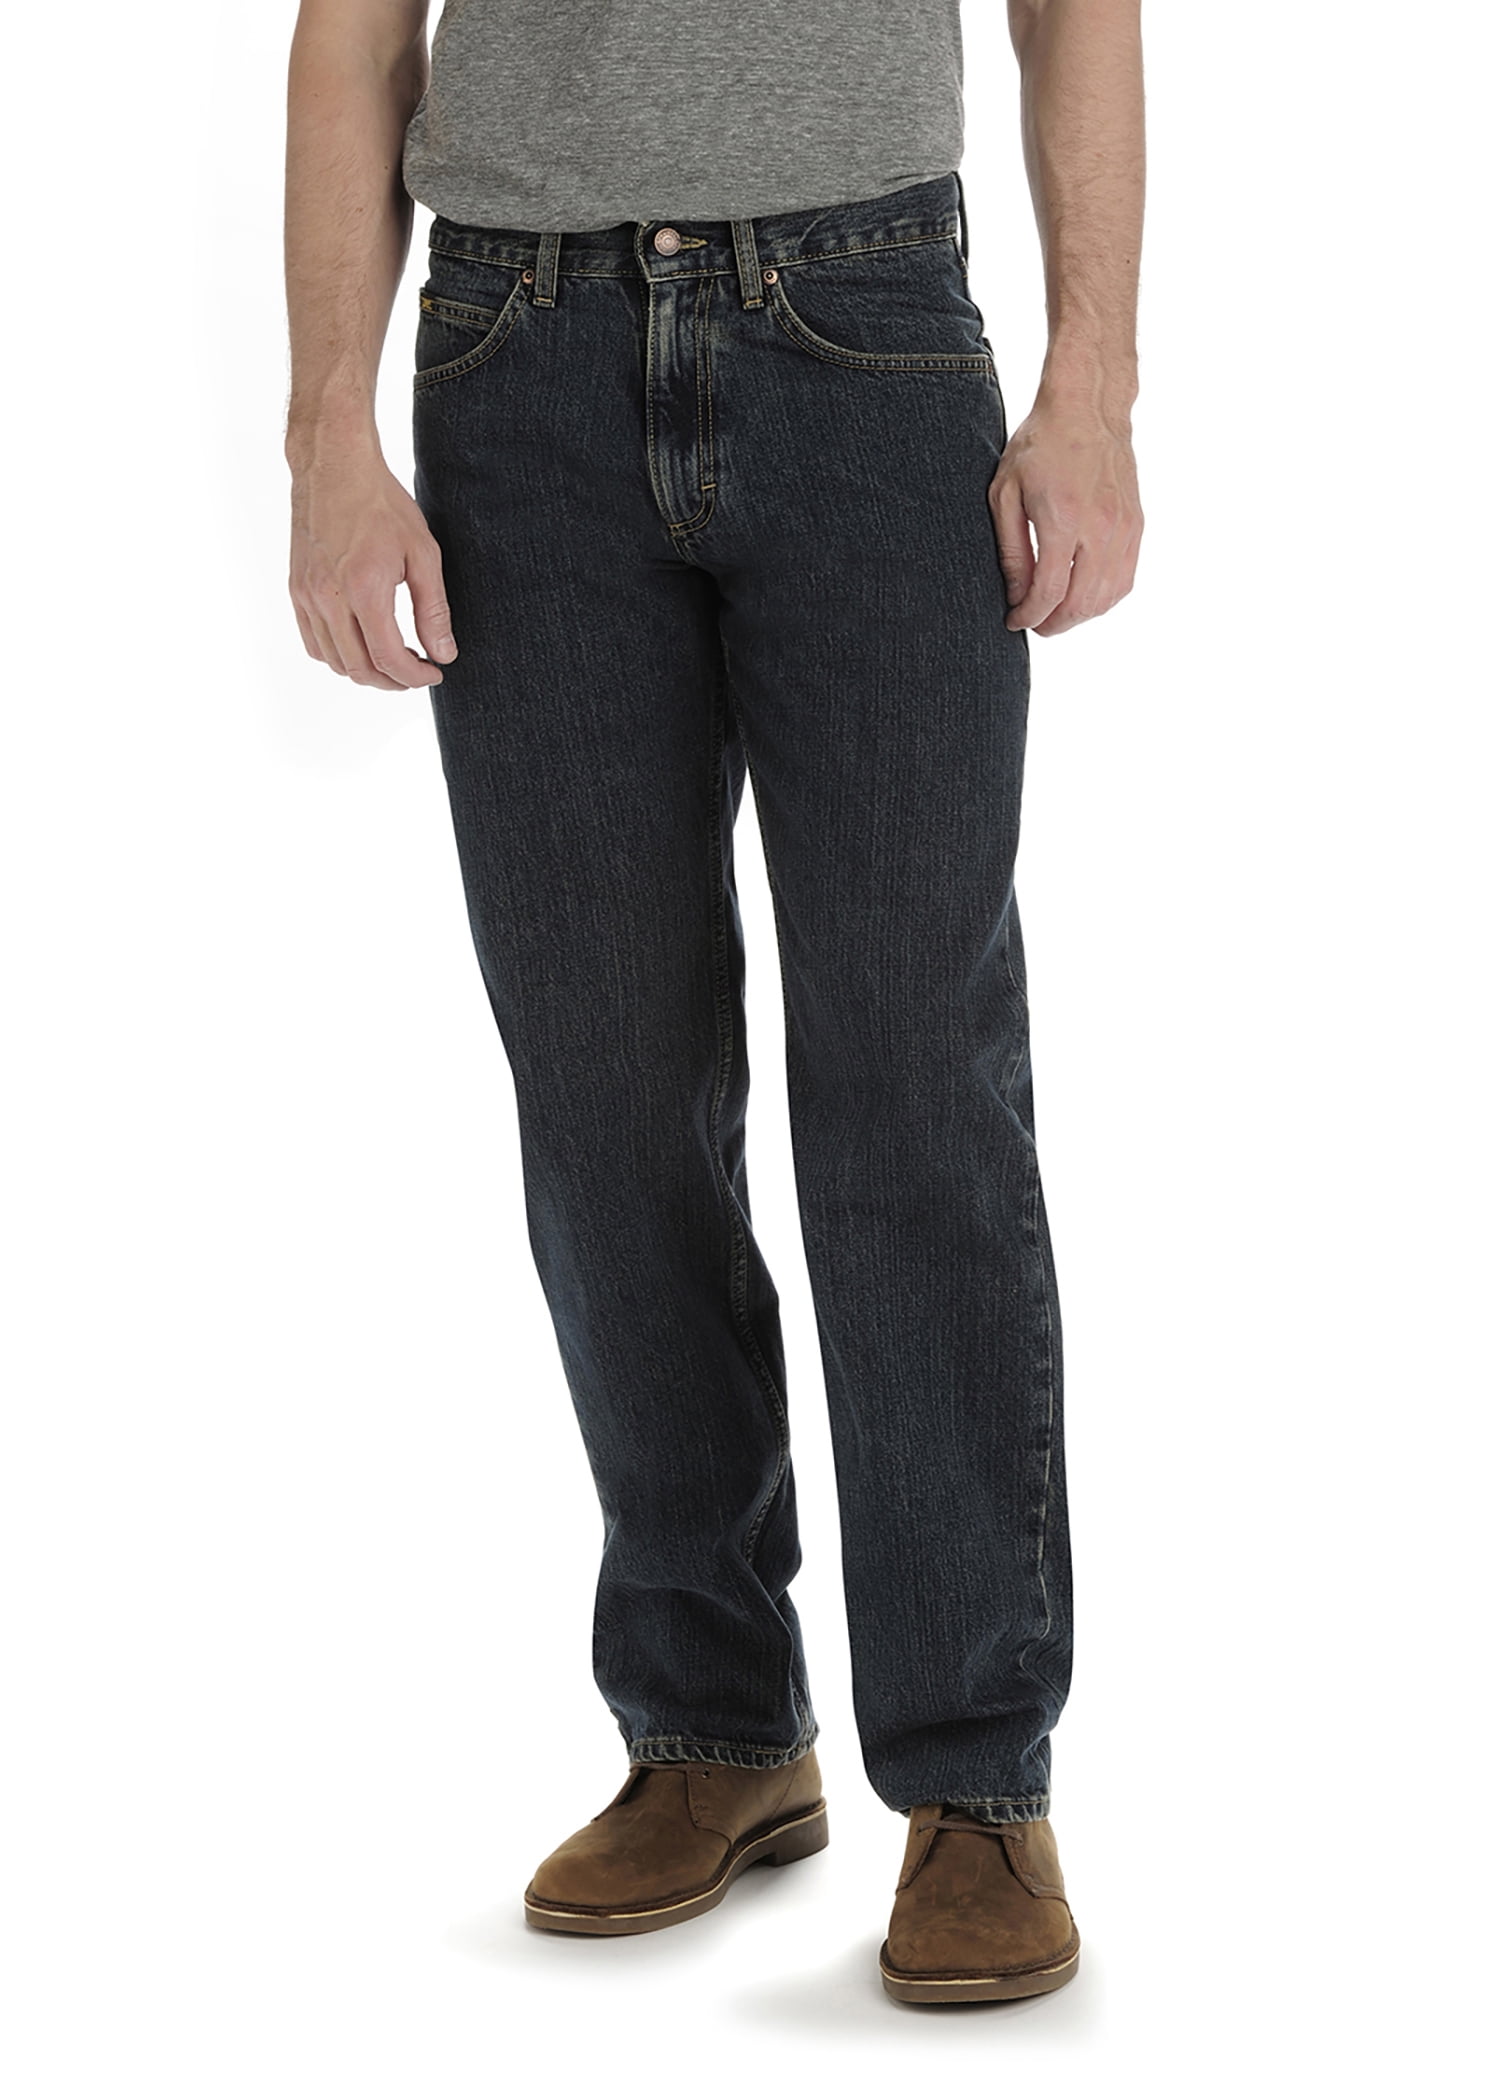 NWT $44 Men's LEE Relaxed Fit Straight Leg Jeans Sits at Waist Style #  2055512 Herrenmode LA2122113